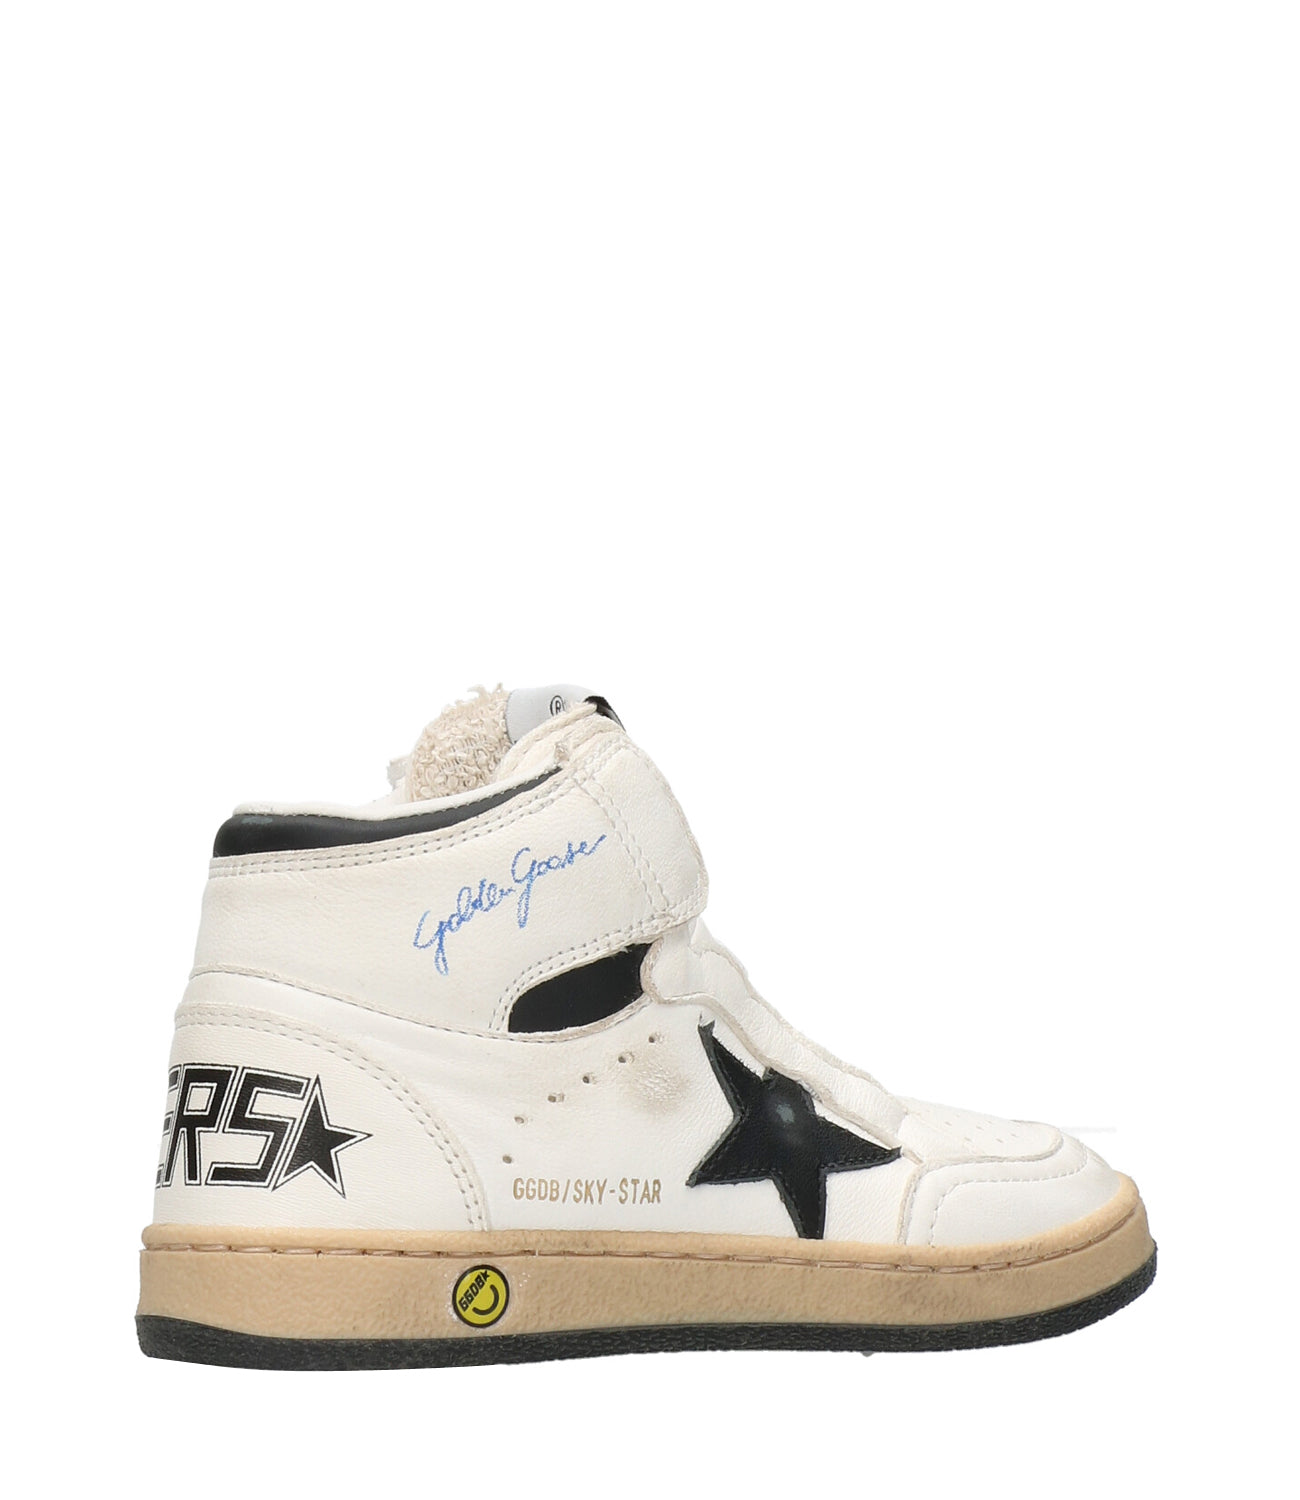 Golden Goose | Sky Star Sneakers Black and White